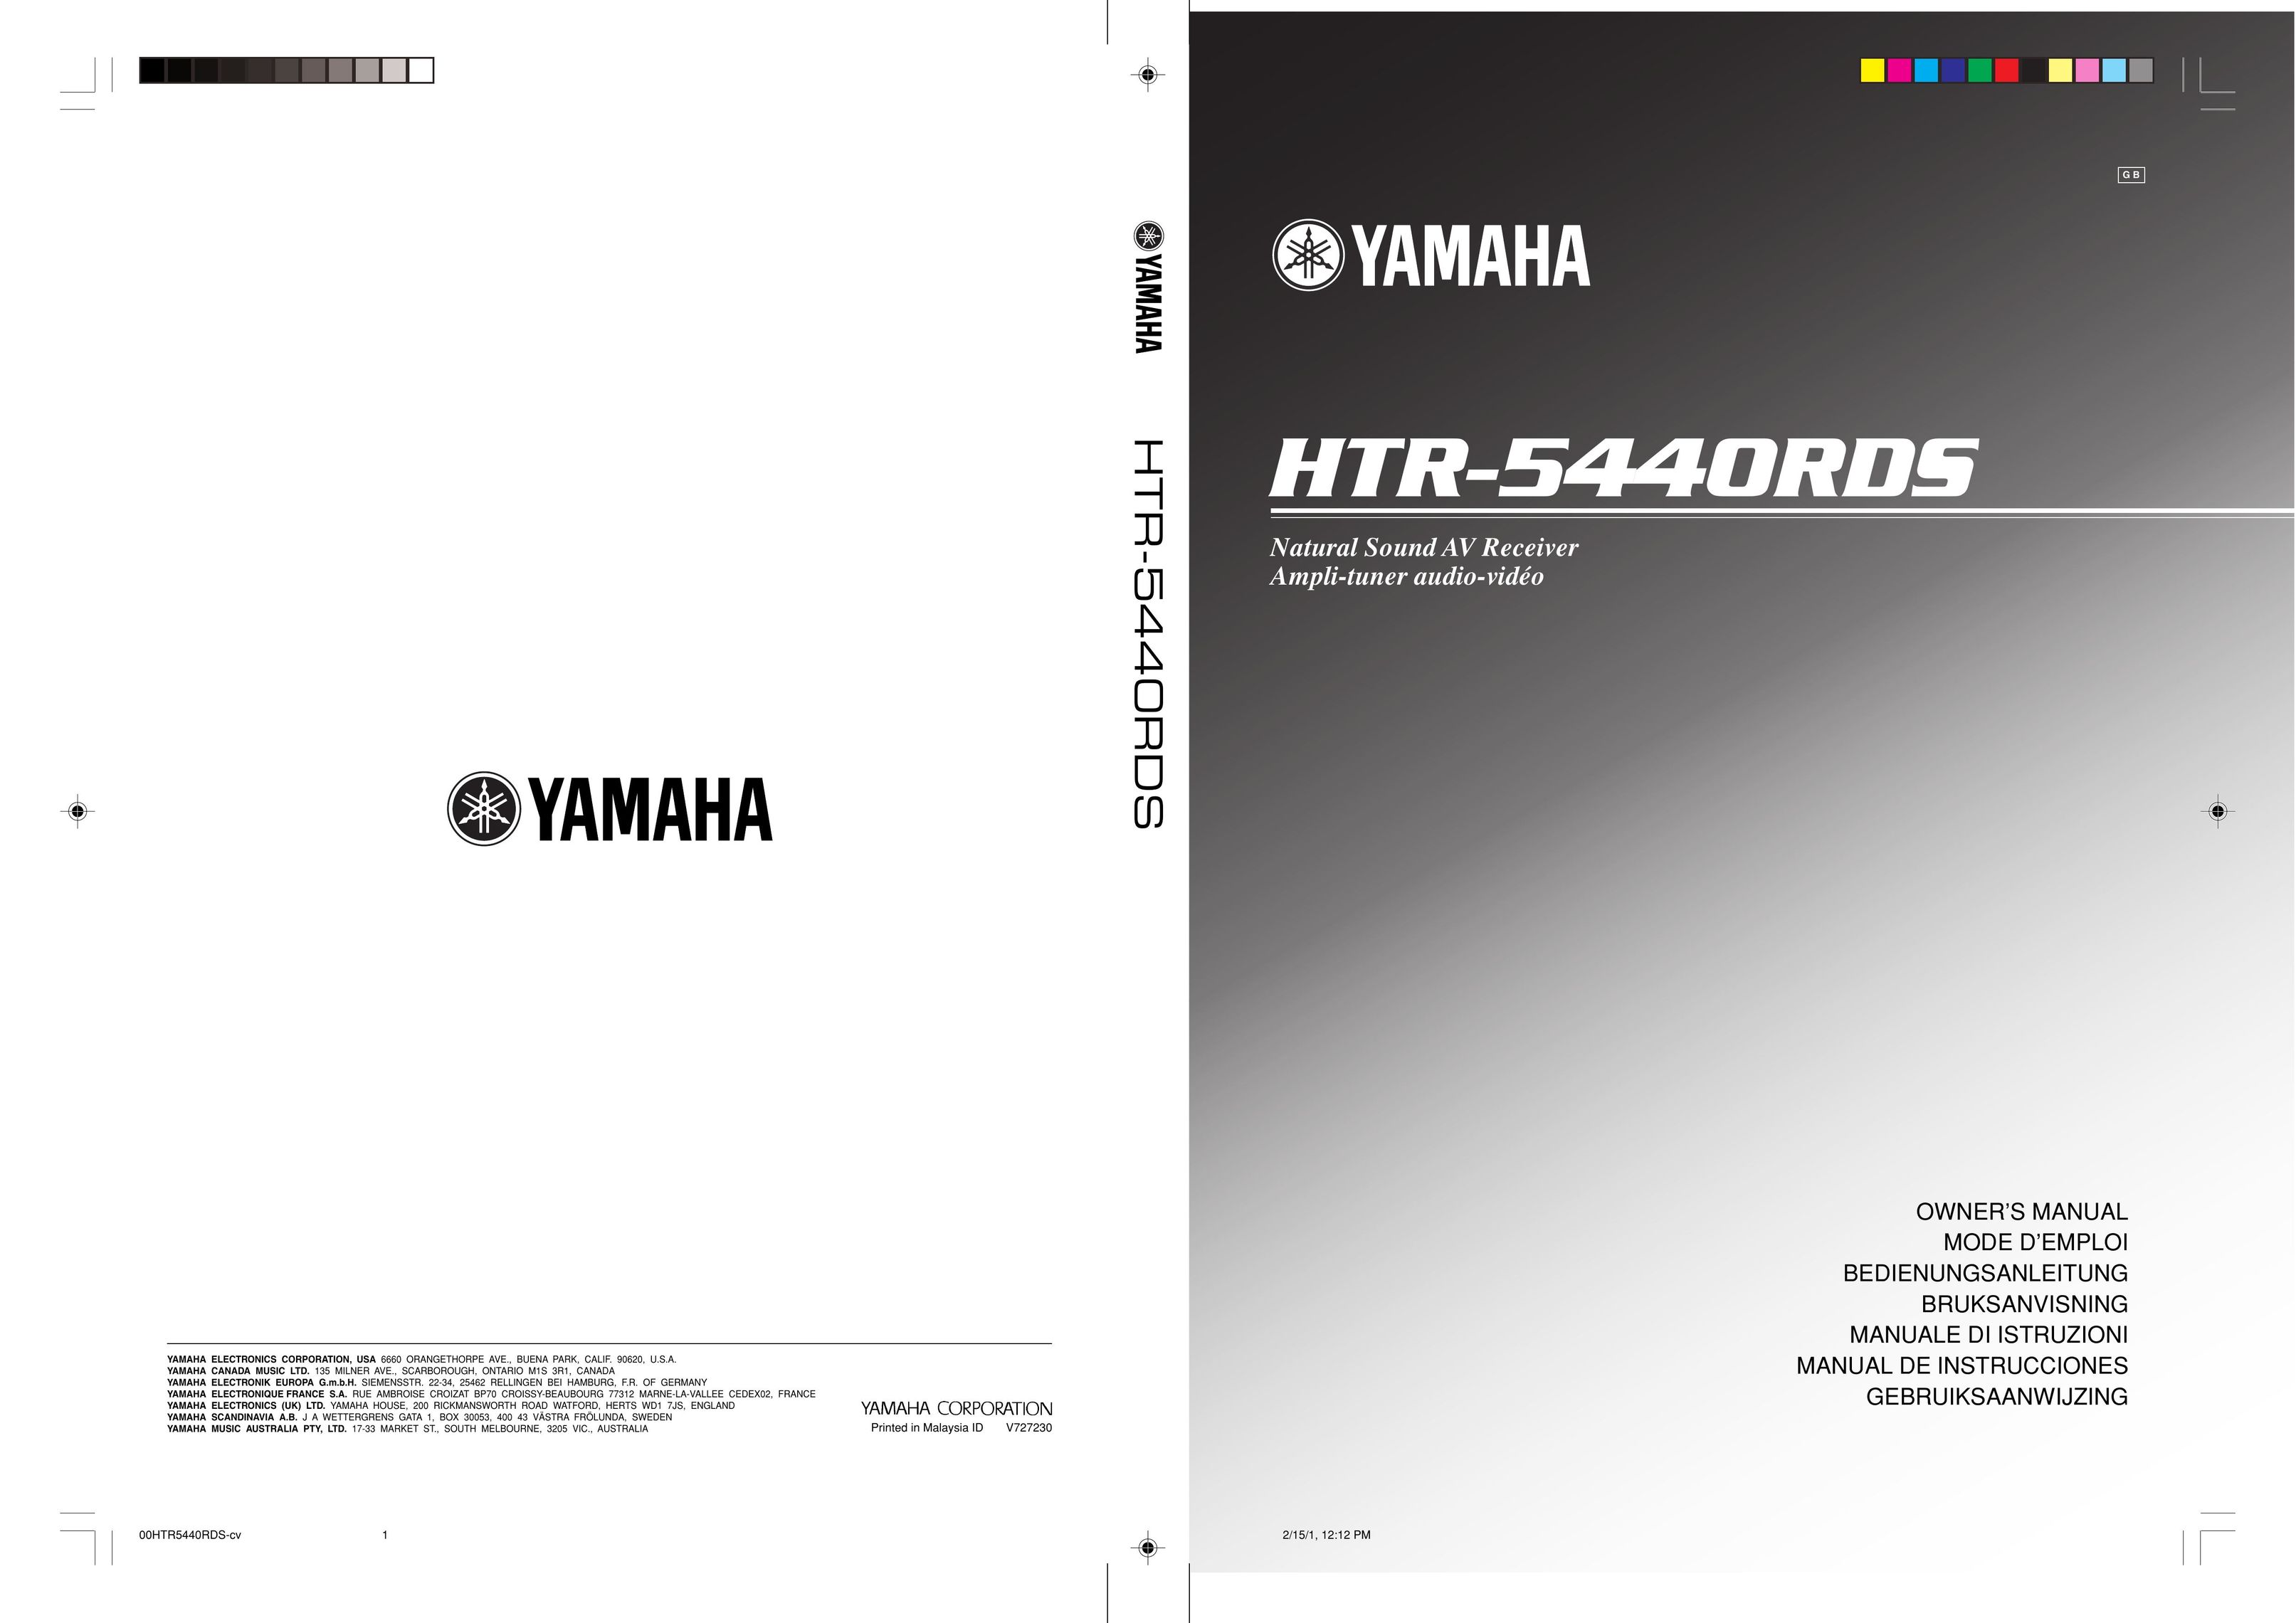 Yamaha HTR-5440RDS Stereo Receiver User Manual